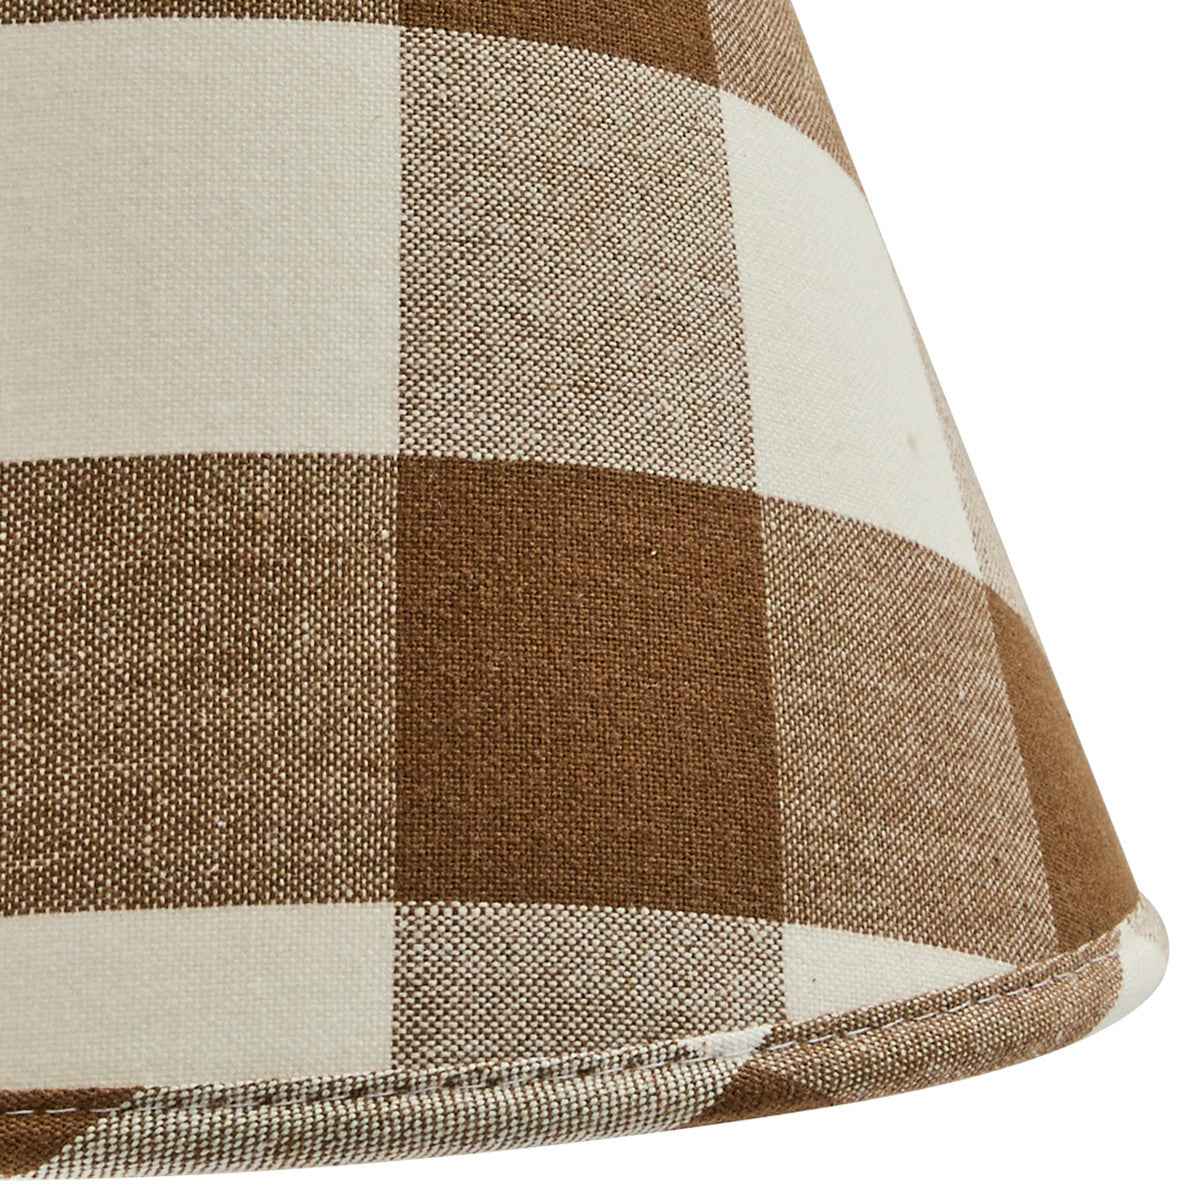 Wicklow Check Brown & Cream Lamp Shade - 10" Set of 2 Park Designs